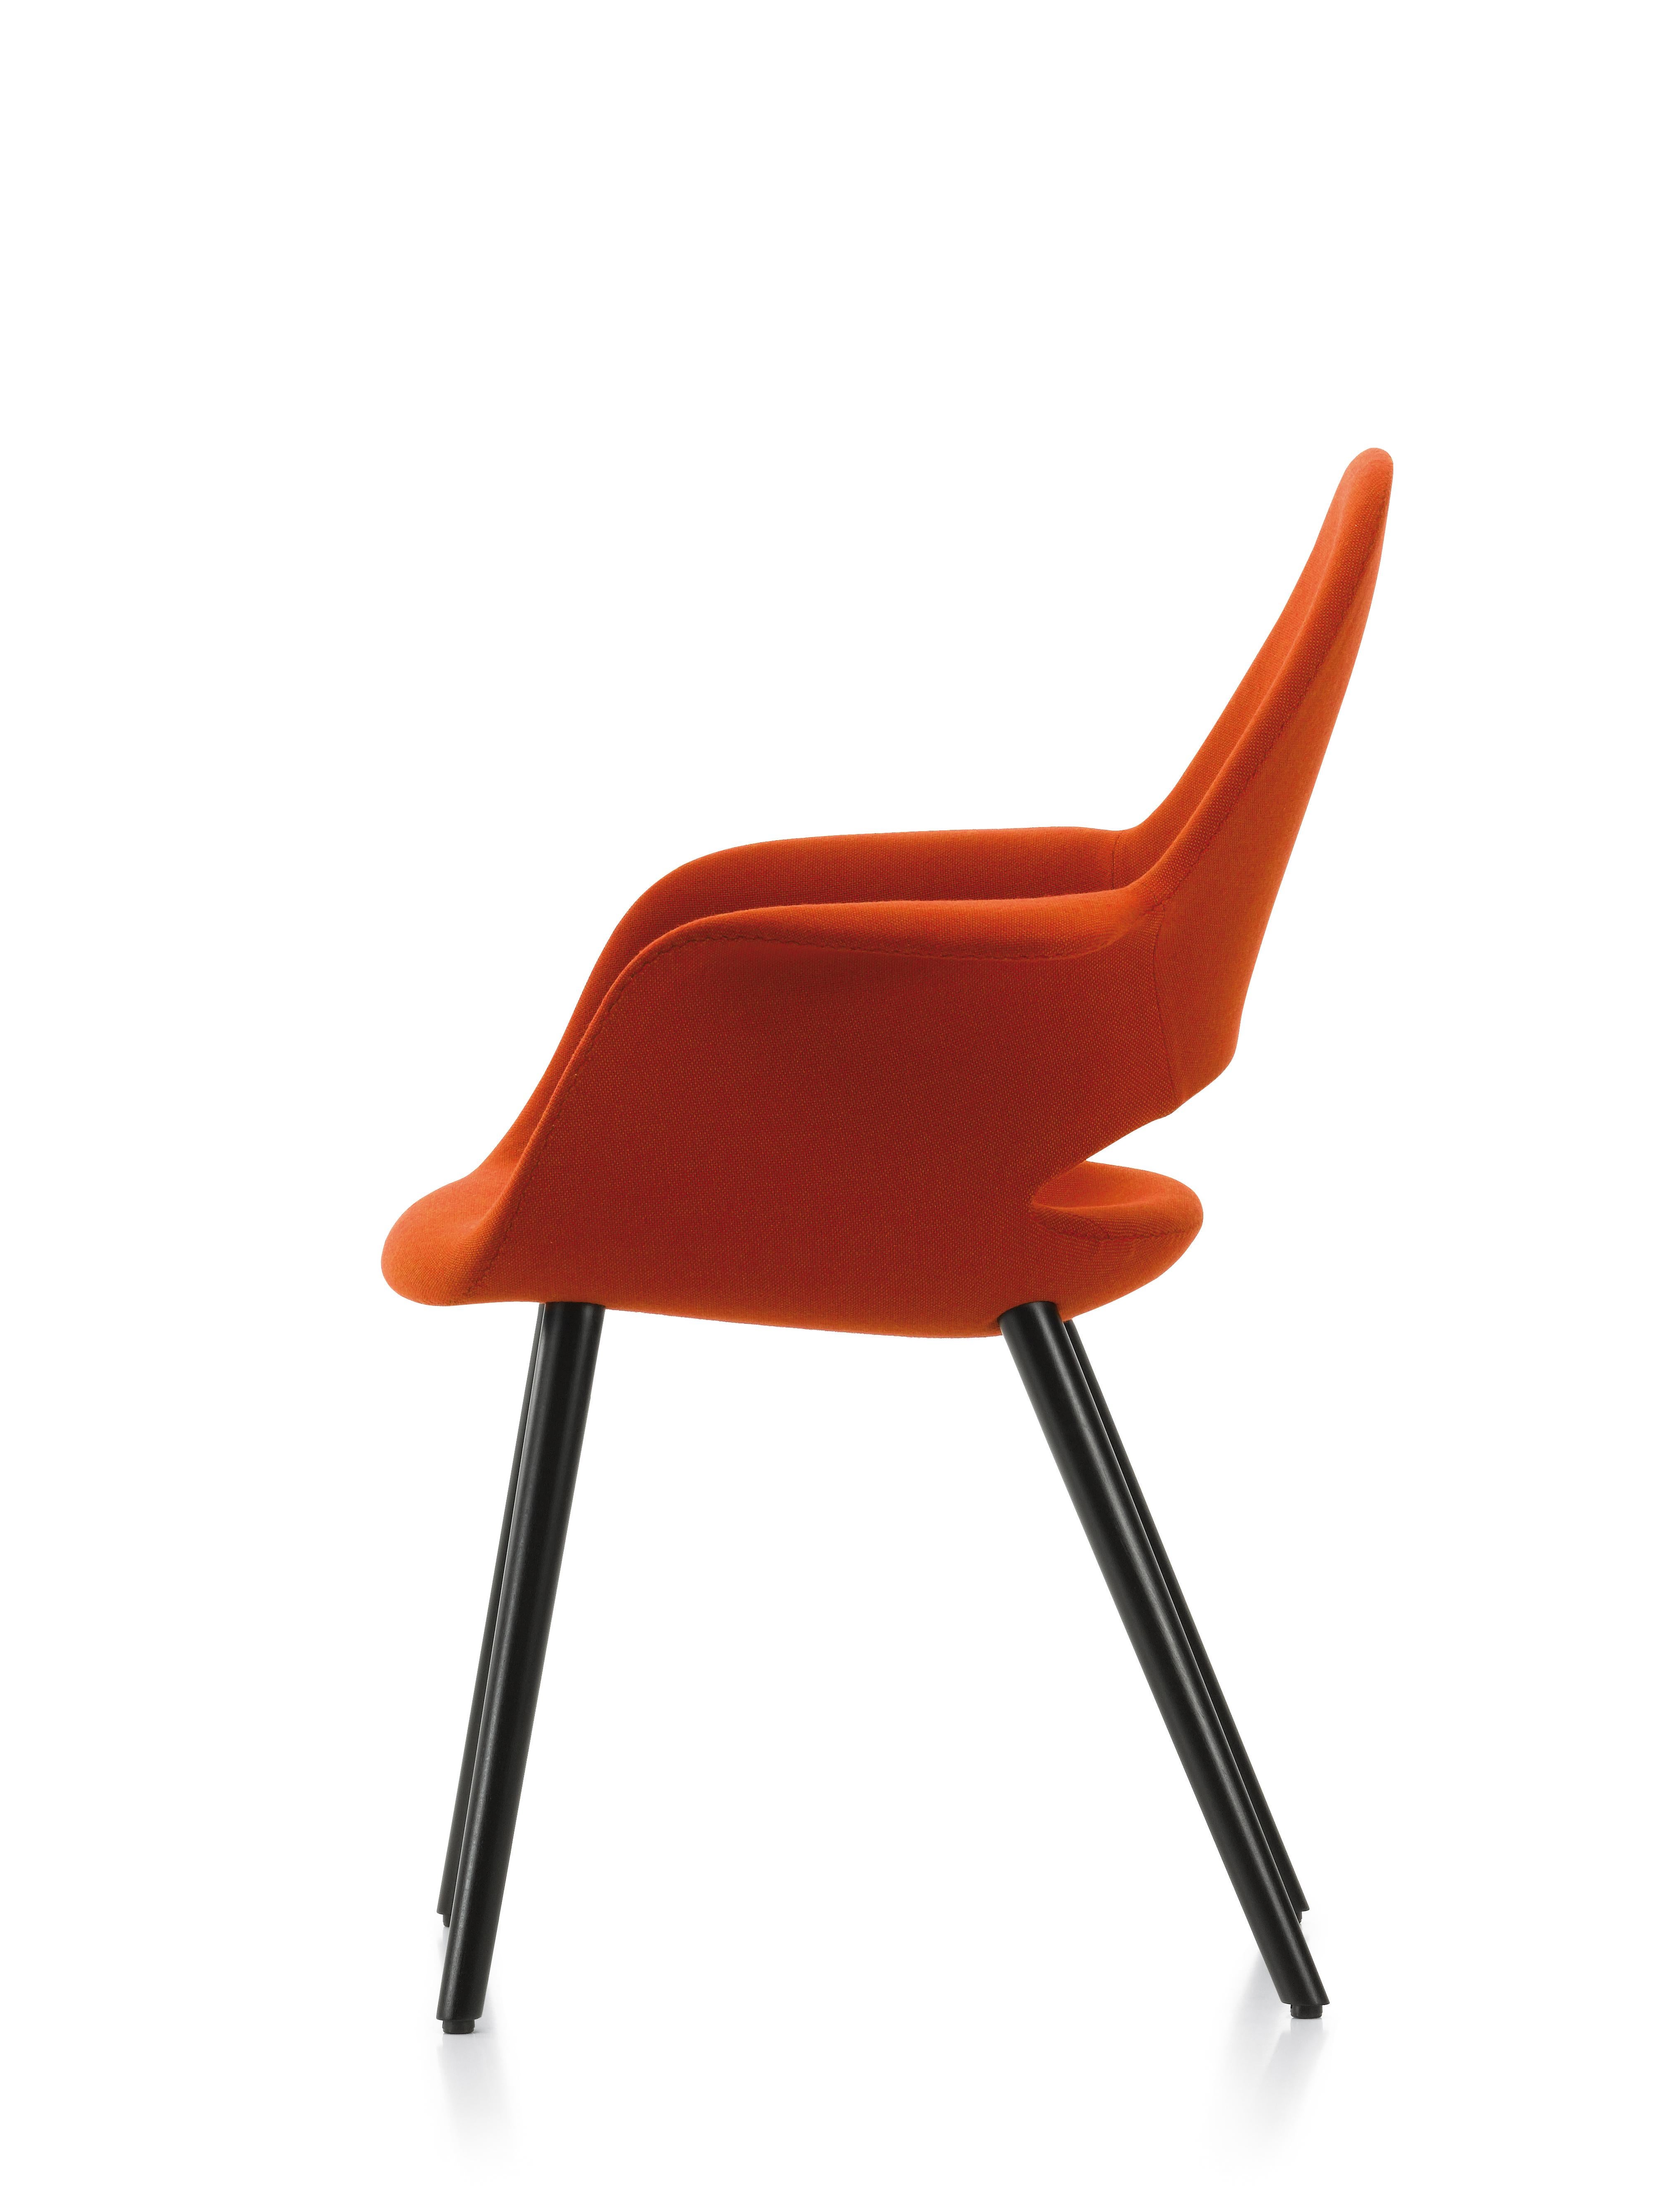 Modern Vitra Organic Conference Chair in Red & Poppy by Charles Eames & Eero Saarinen For Sale